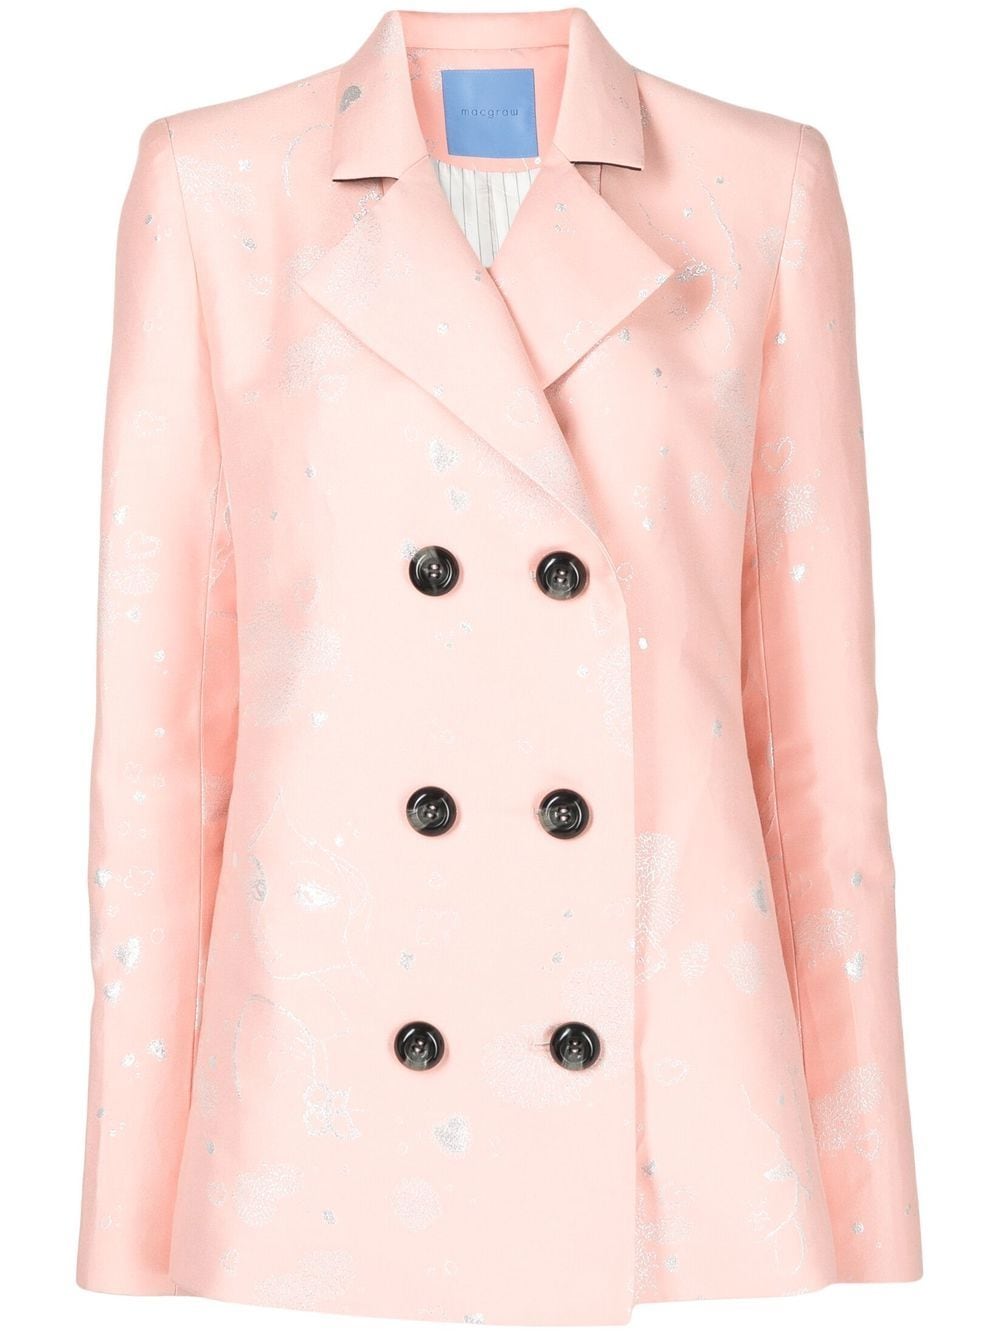 Macgraw Stereotype jacquard double-breasted blazer - Pink von Macgraw